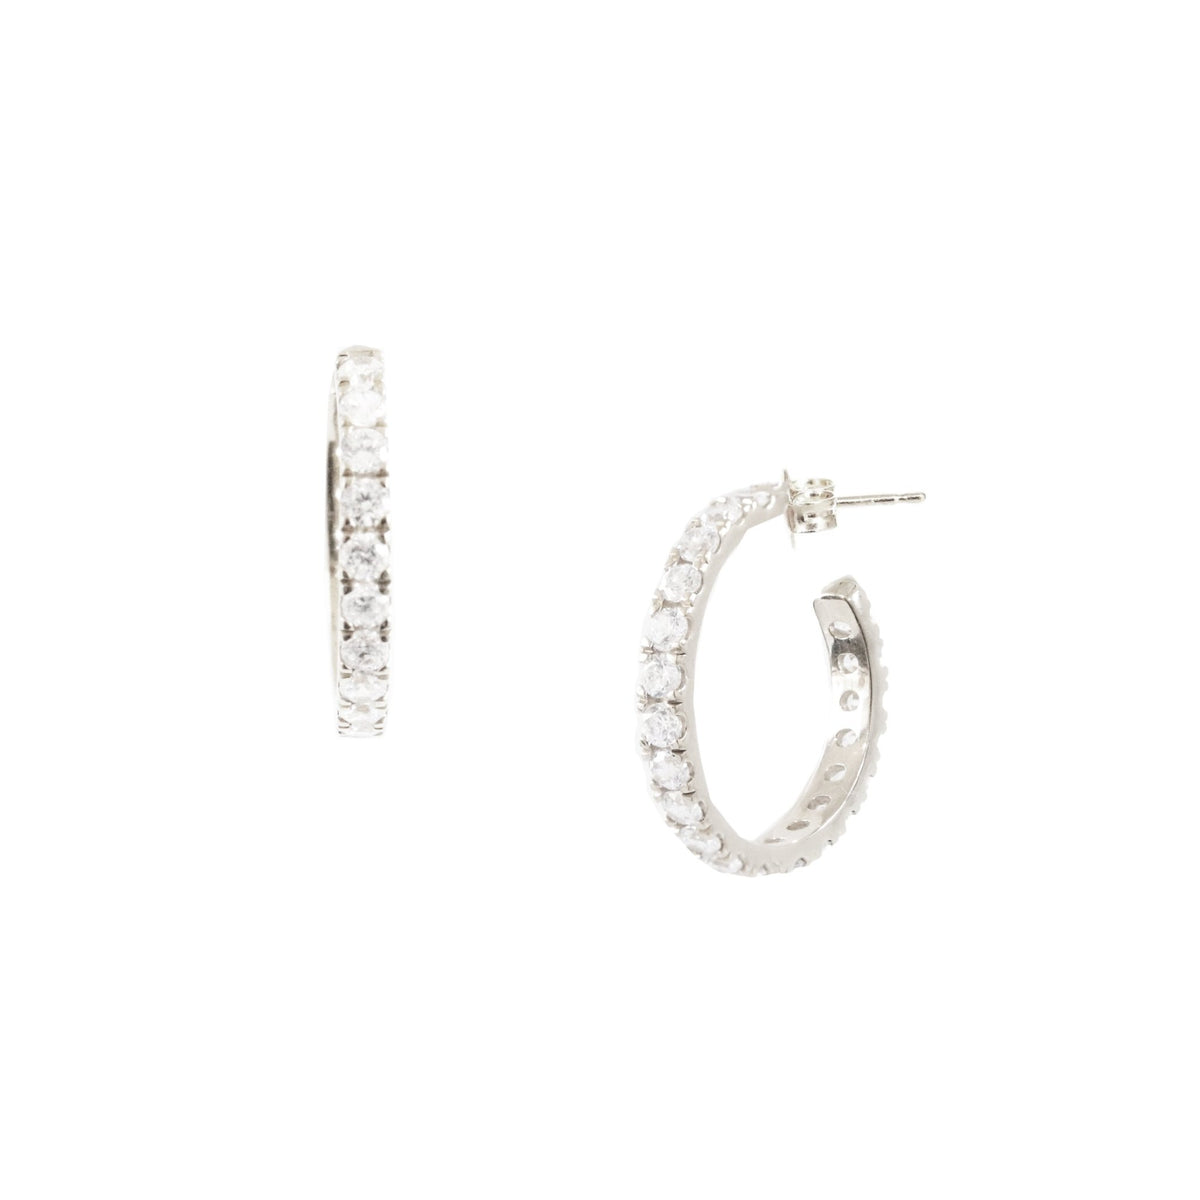 DAY 10 - LARGE LOVE HOOPS - CUBIC ZIRCONIA - SO PRETTY CARA COTTER